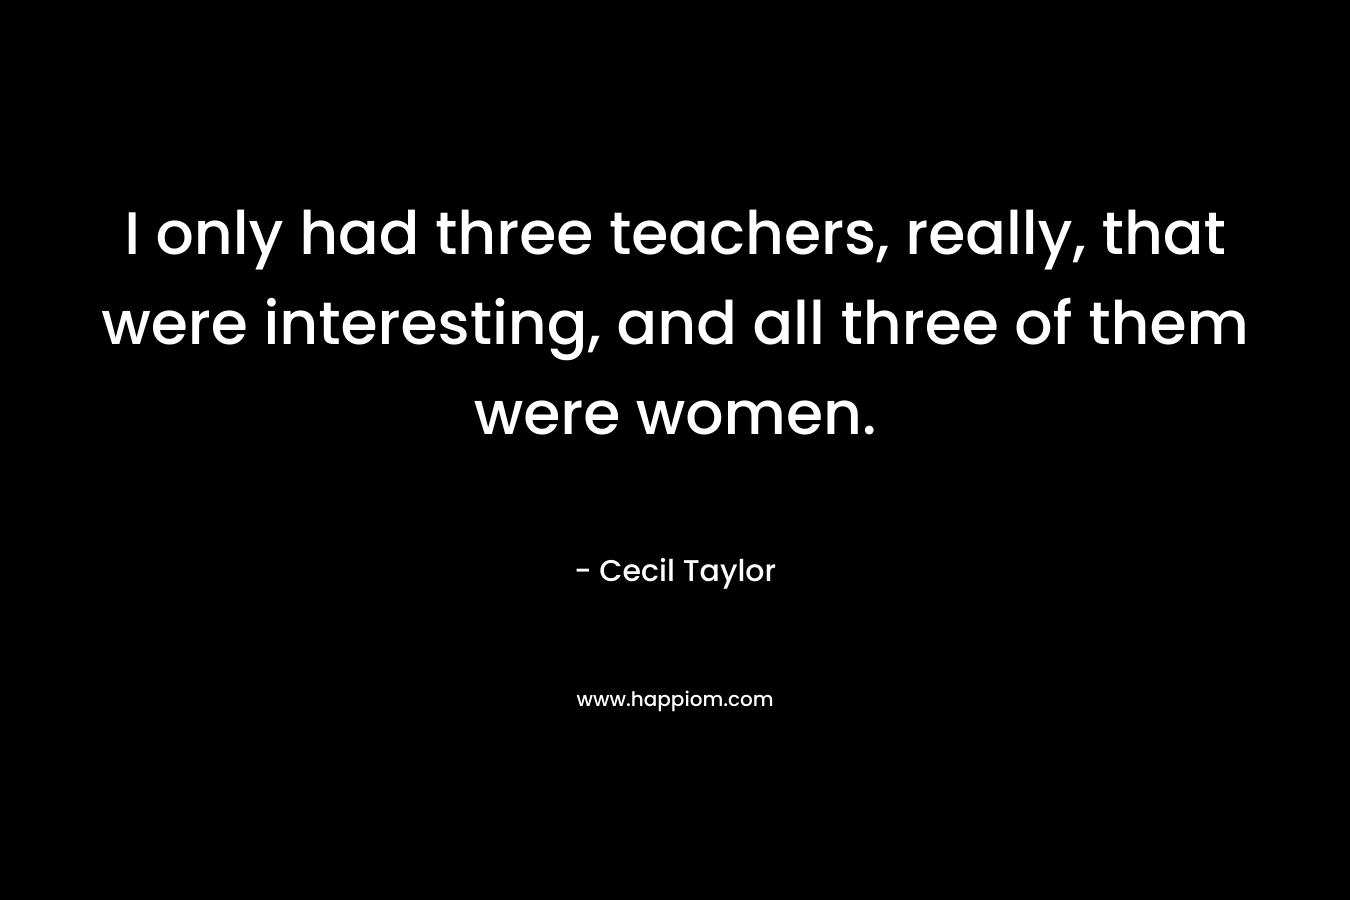 I only had three teachers, really, that were interesting, and all three of them were women.